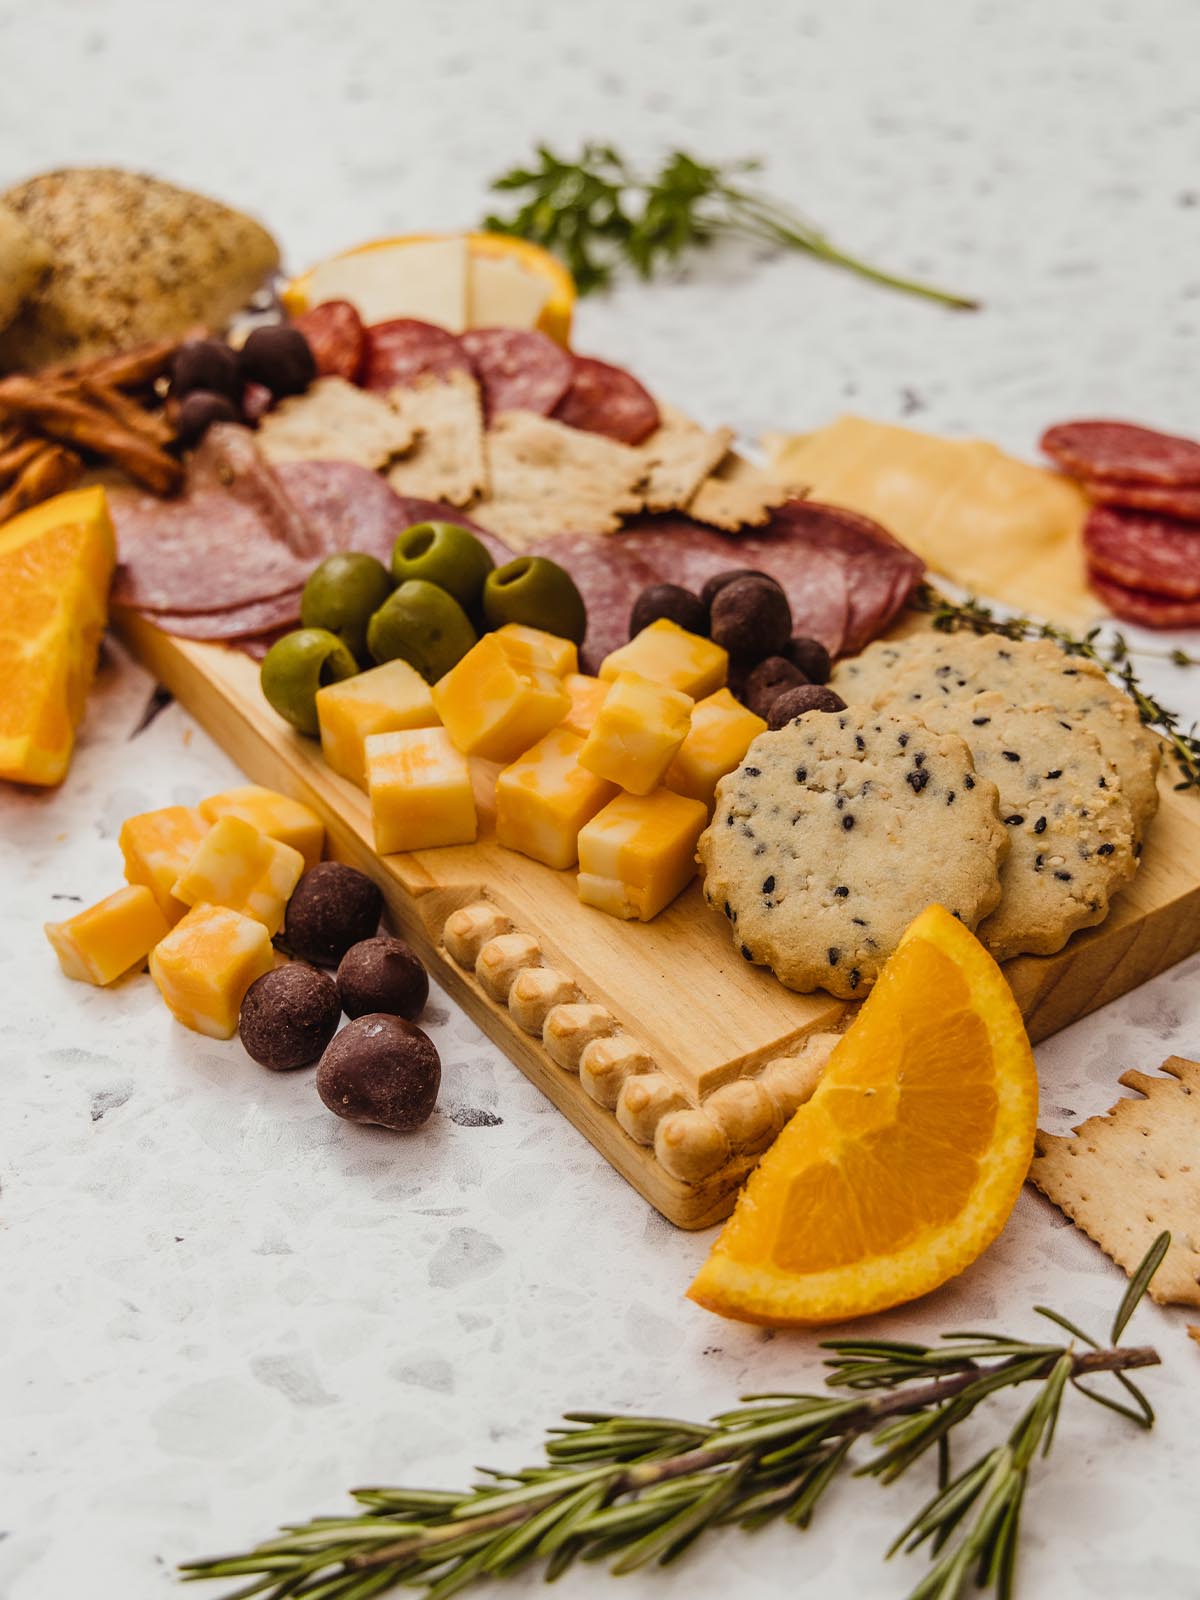 Rectangular wooden charcuterie board with meat and cheese seen on board. 